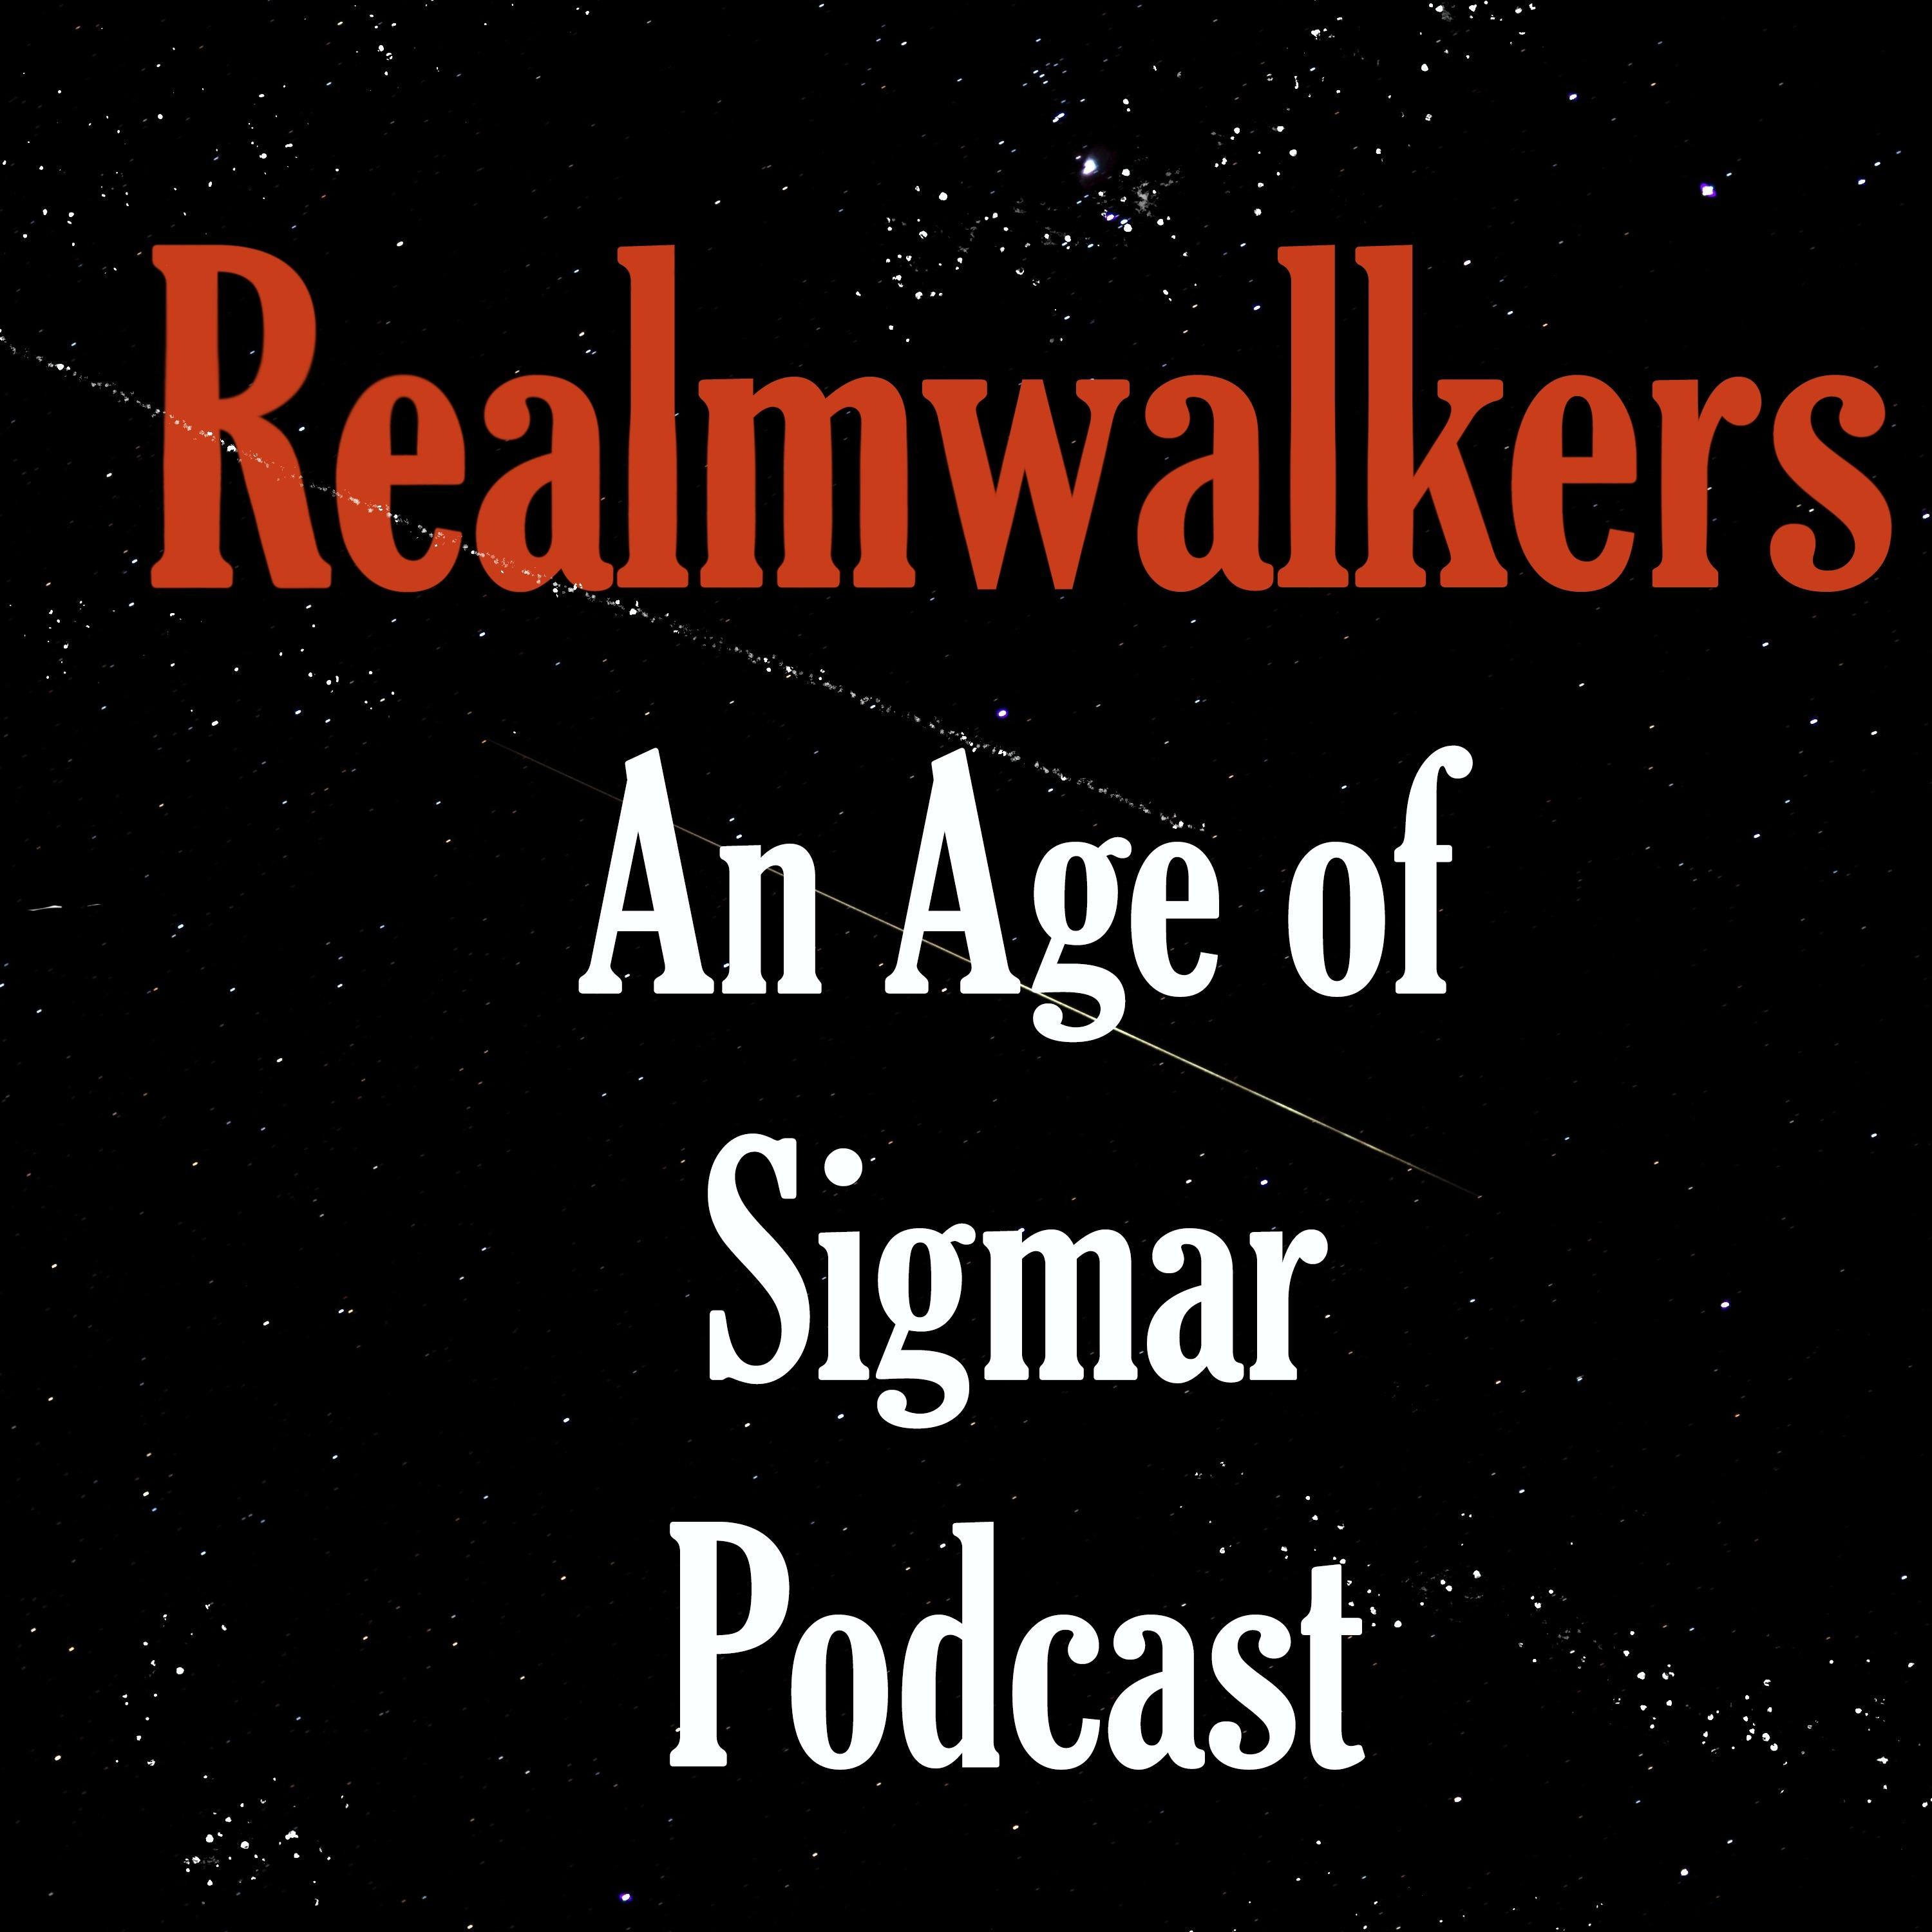 Realmwalkers: An Age of Sigmar Podcast